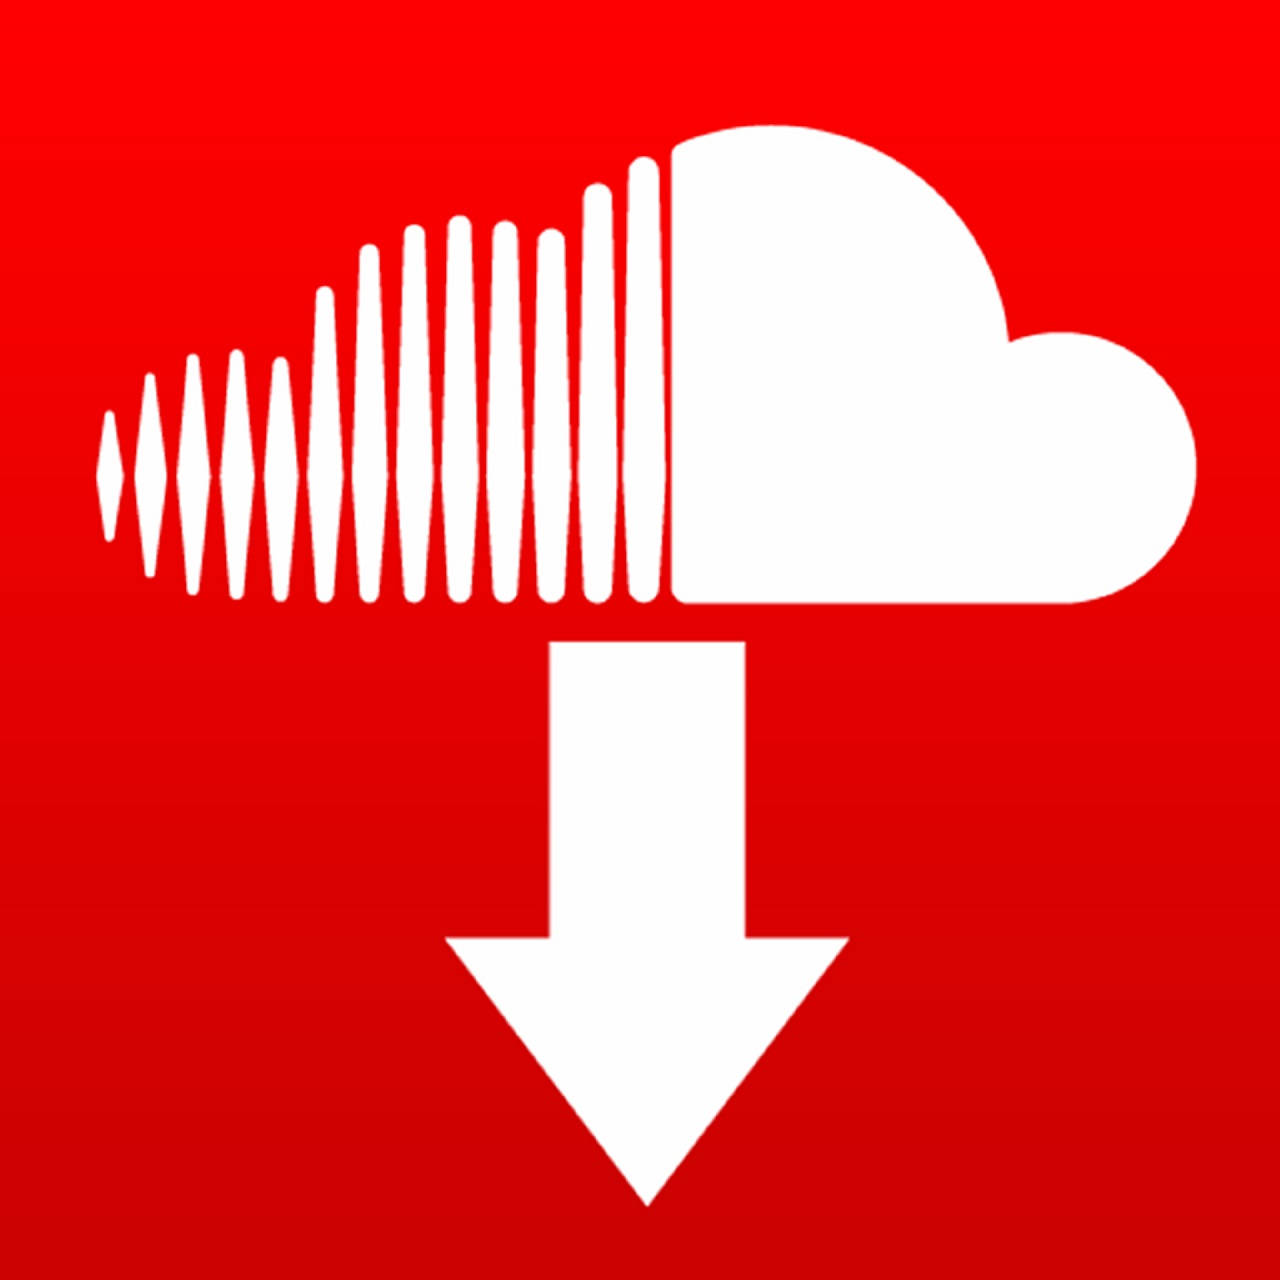 Soundcloud Audio Streaming